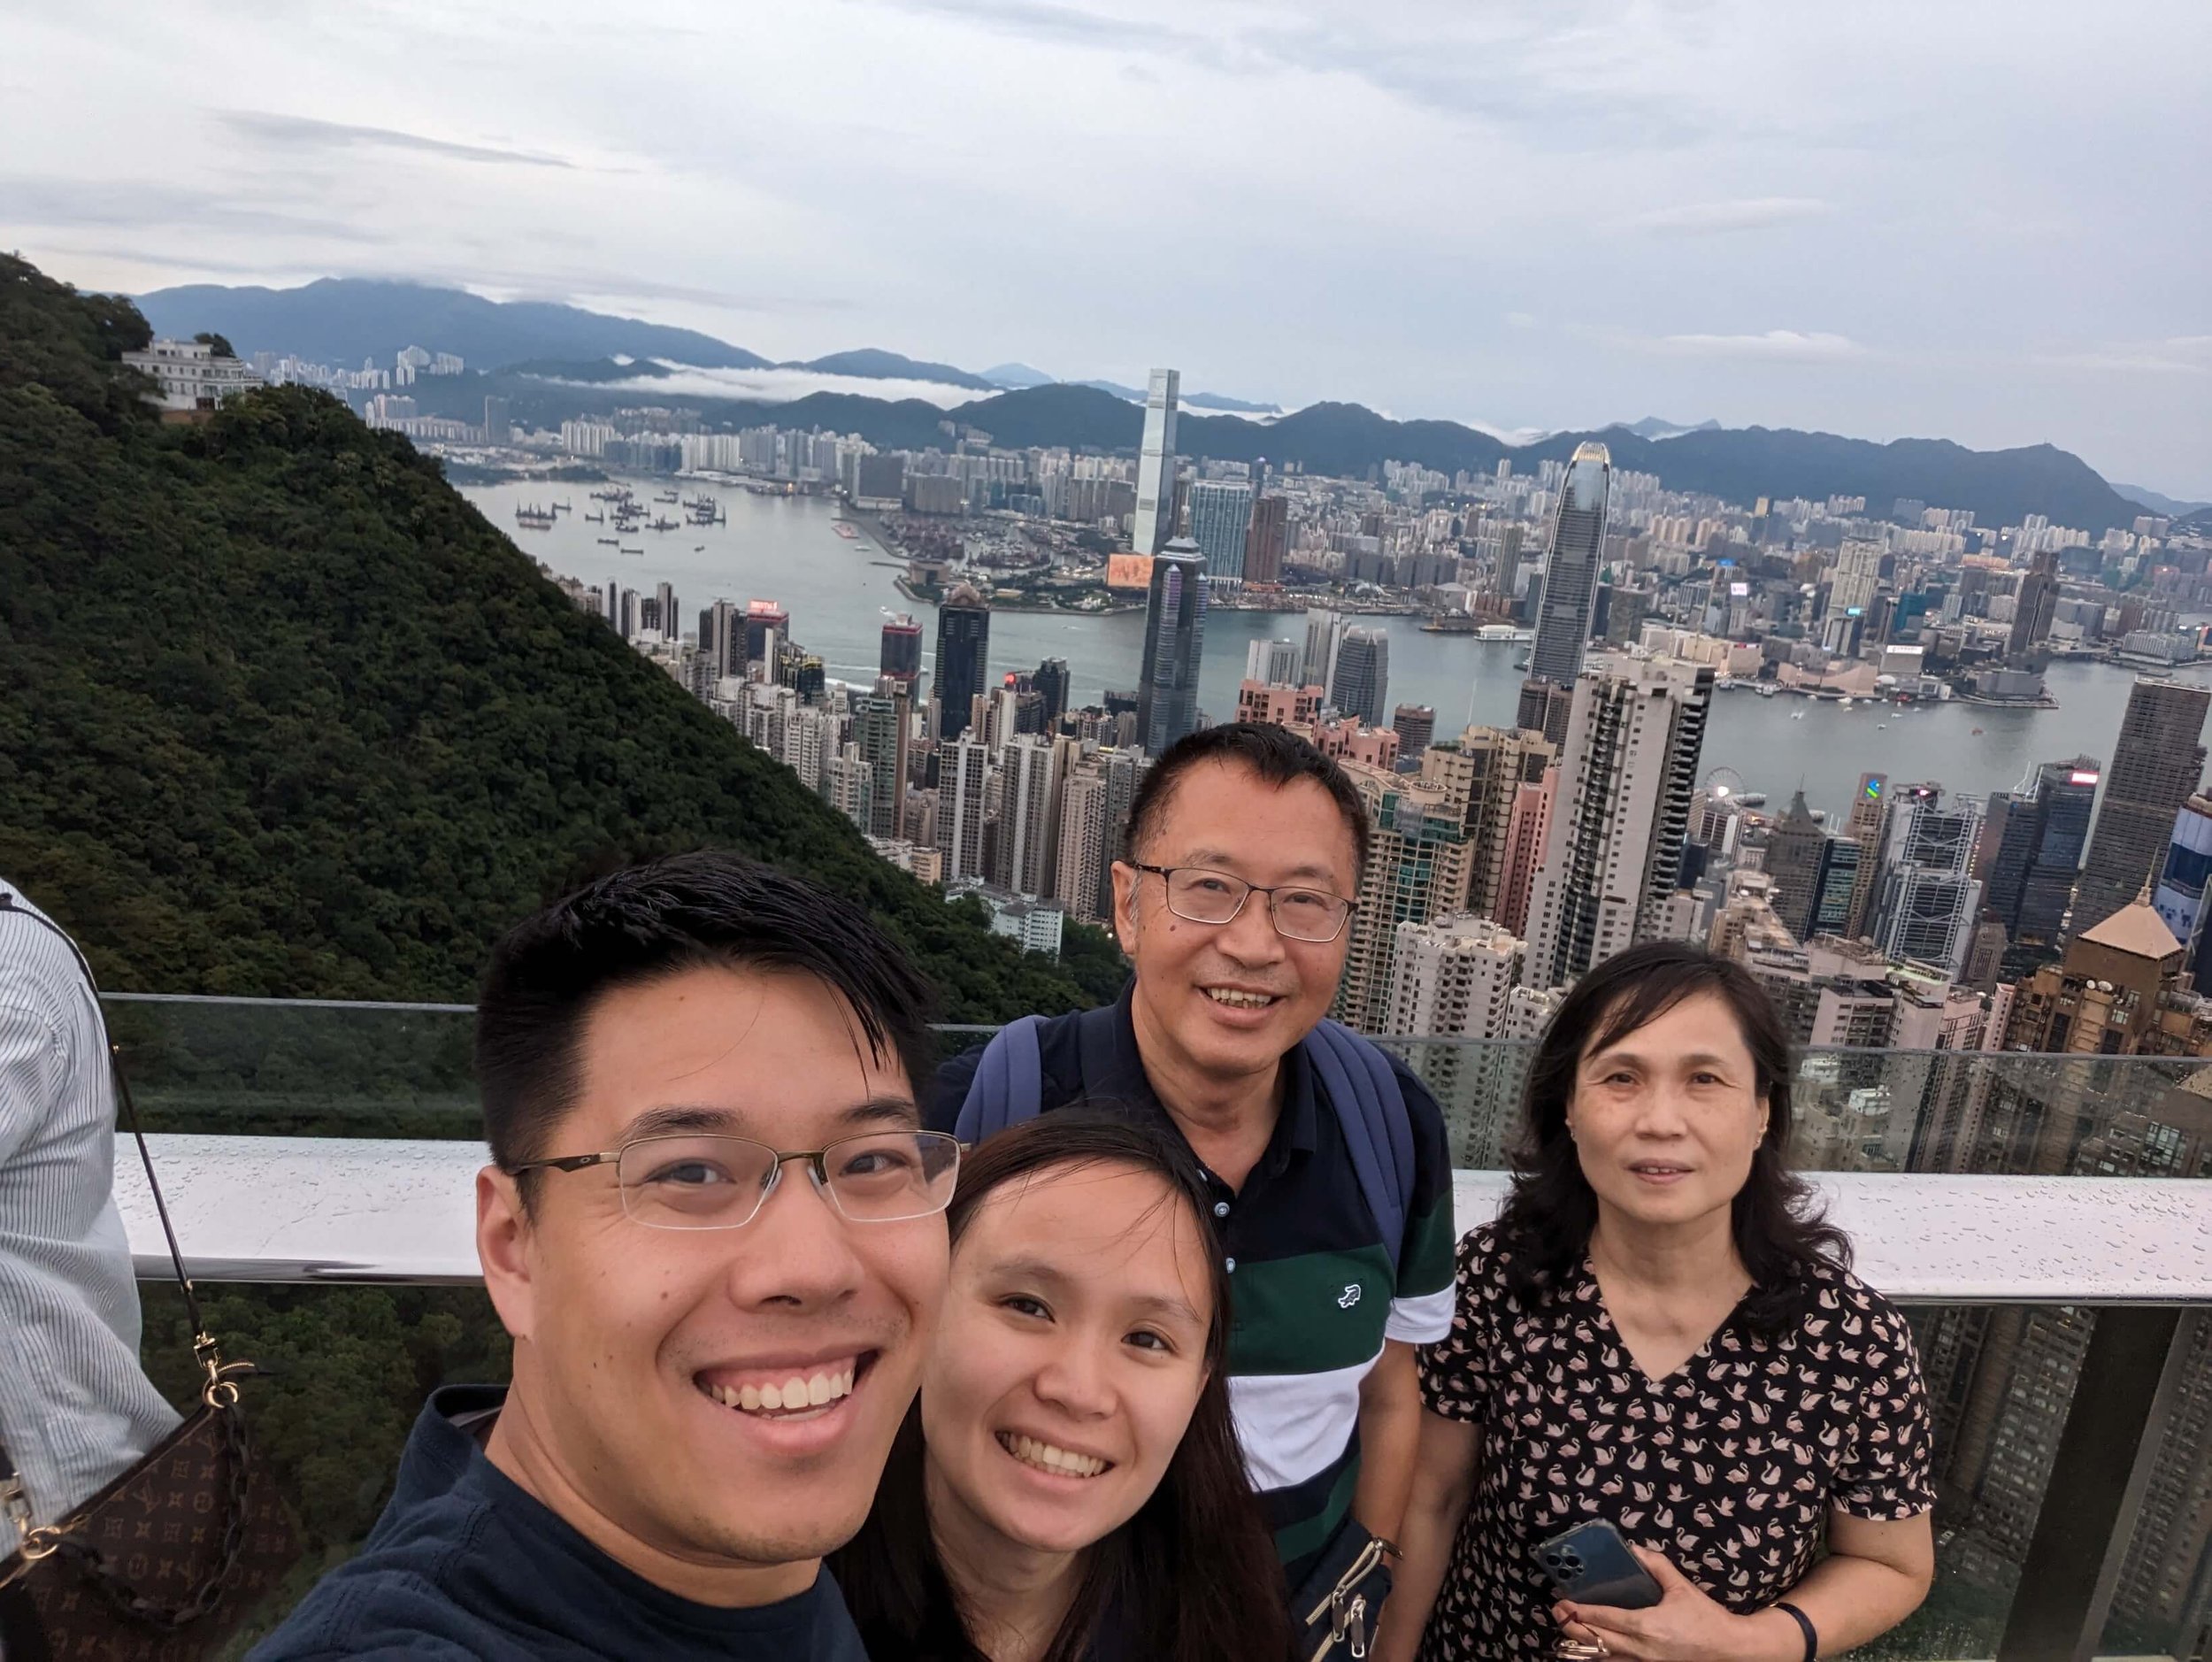 Daniel and his family looking over the Hong Kong skyline!